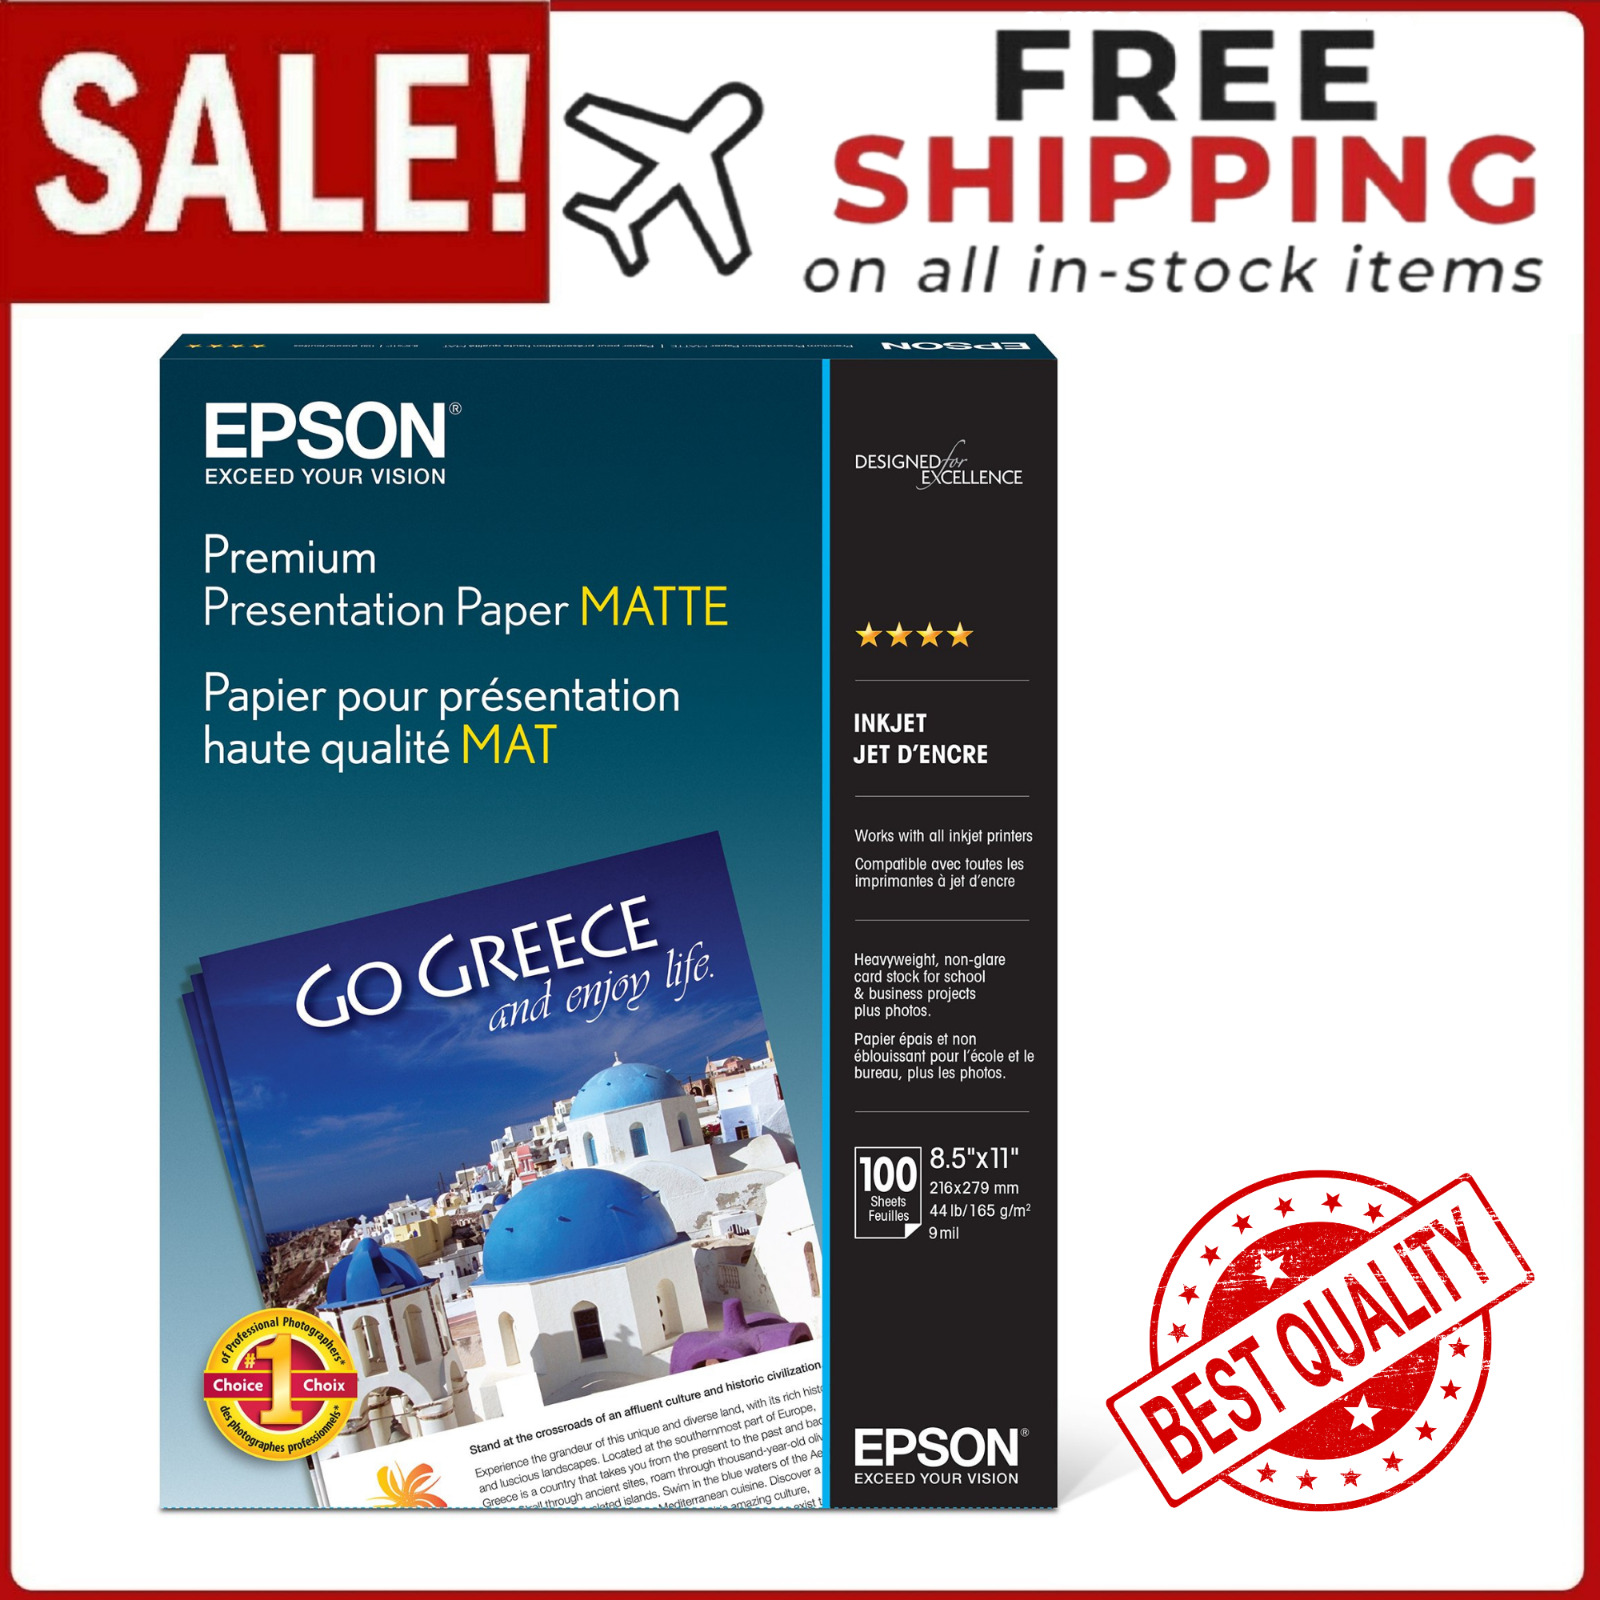 Epson Premium Presentation Paper MATTE (8.5x11 Inches, Double-sided, 50 Sheets)